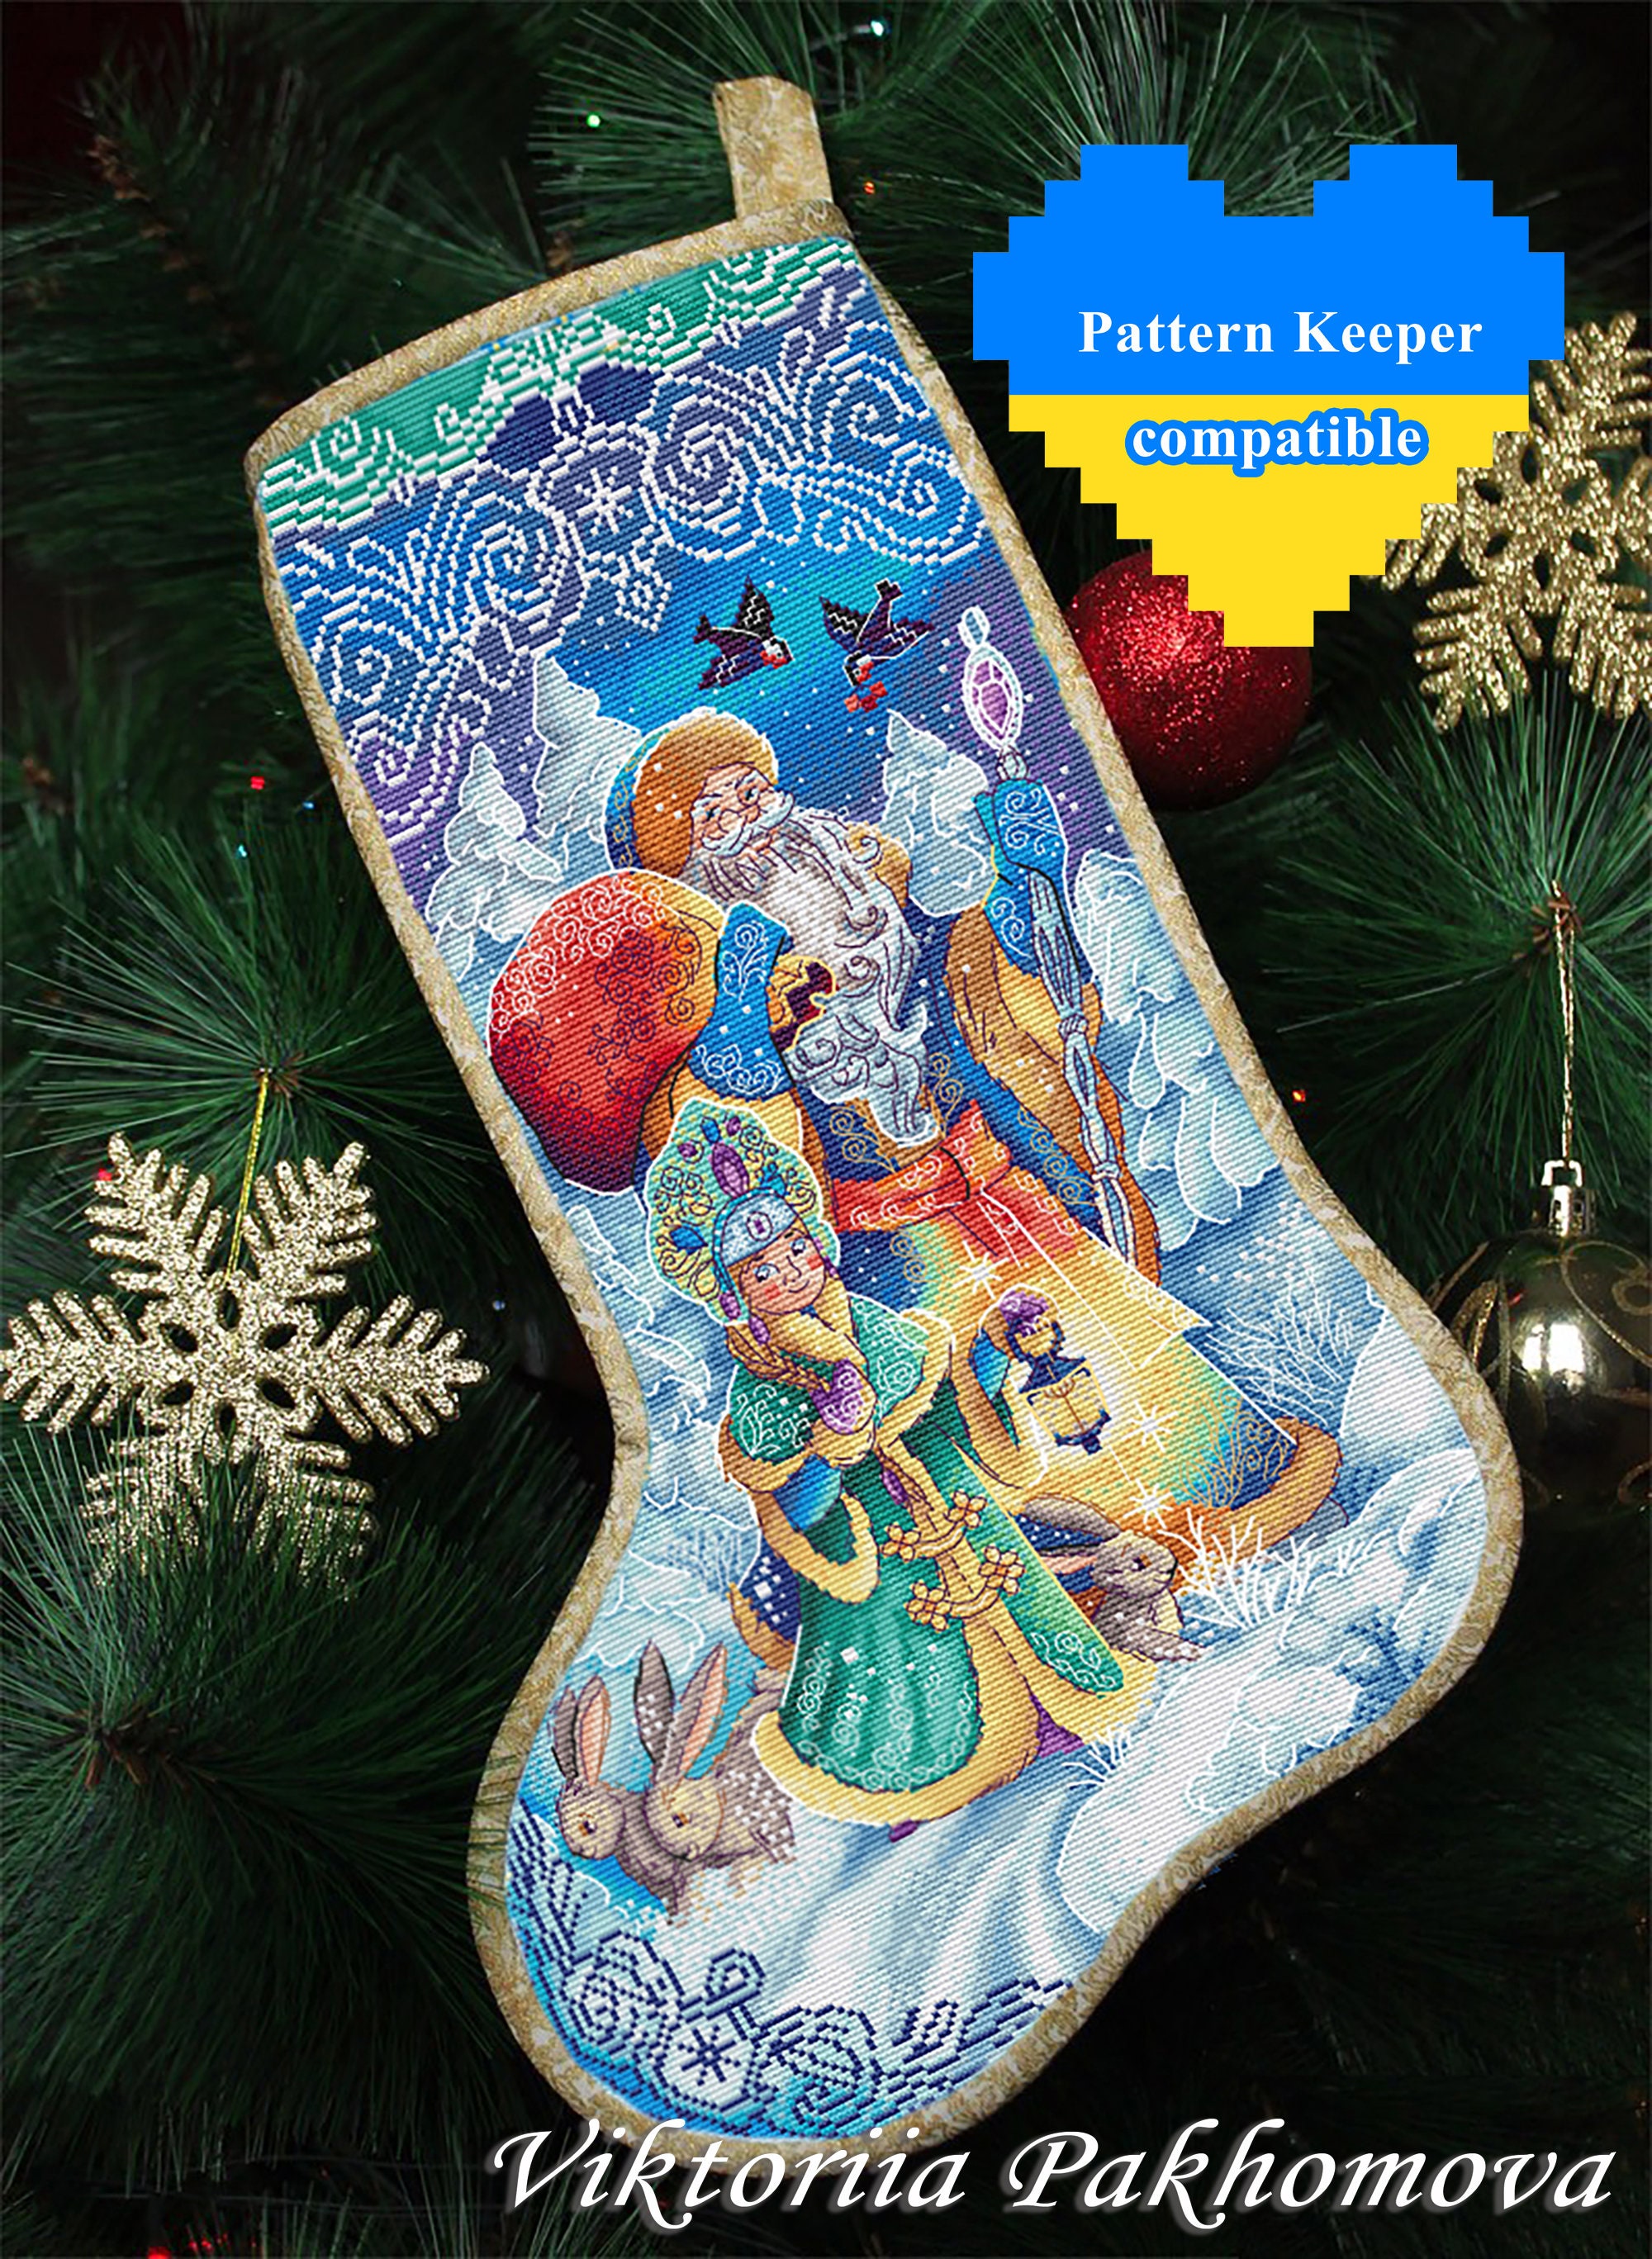 DIY Needlepoint Counted Cross Stitch Cozy Christmas Stocking Embroidery  Kit